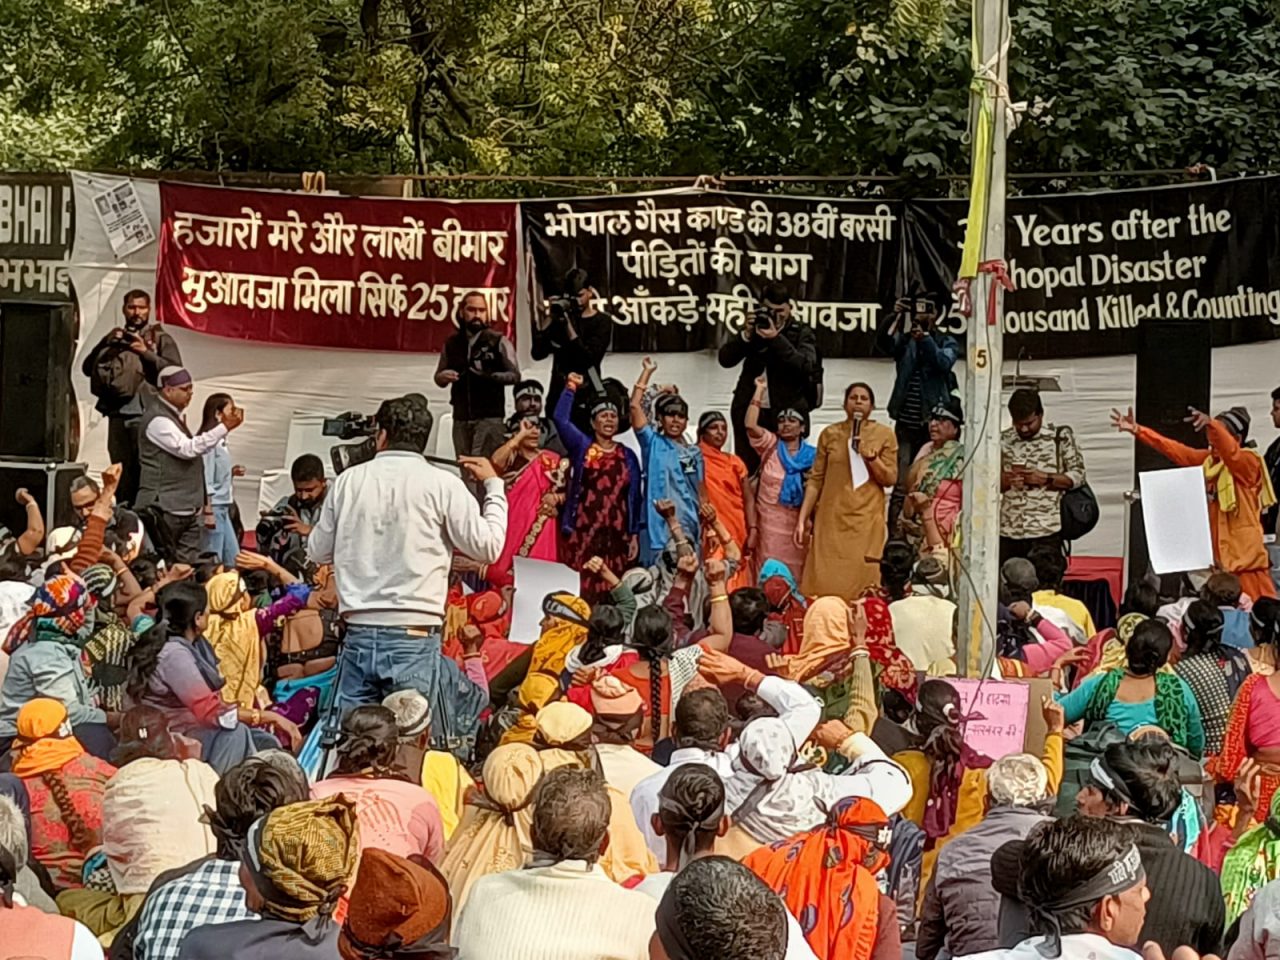 Bhopal-Gas-Tragedy-survivors-of-the-Union-Carbide-Gas-Disaster-of-3rd-December-1984-demonstrating-at-Jantar-Mantar-in-New-Delhi-on-Saturday.-1280x960.jpg